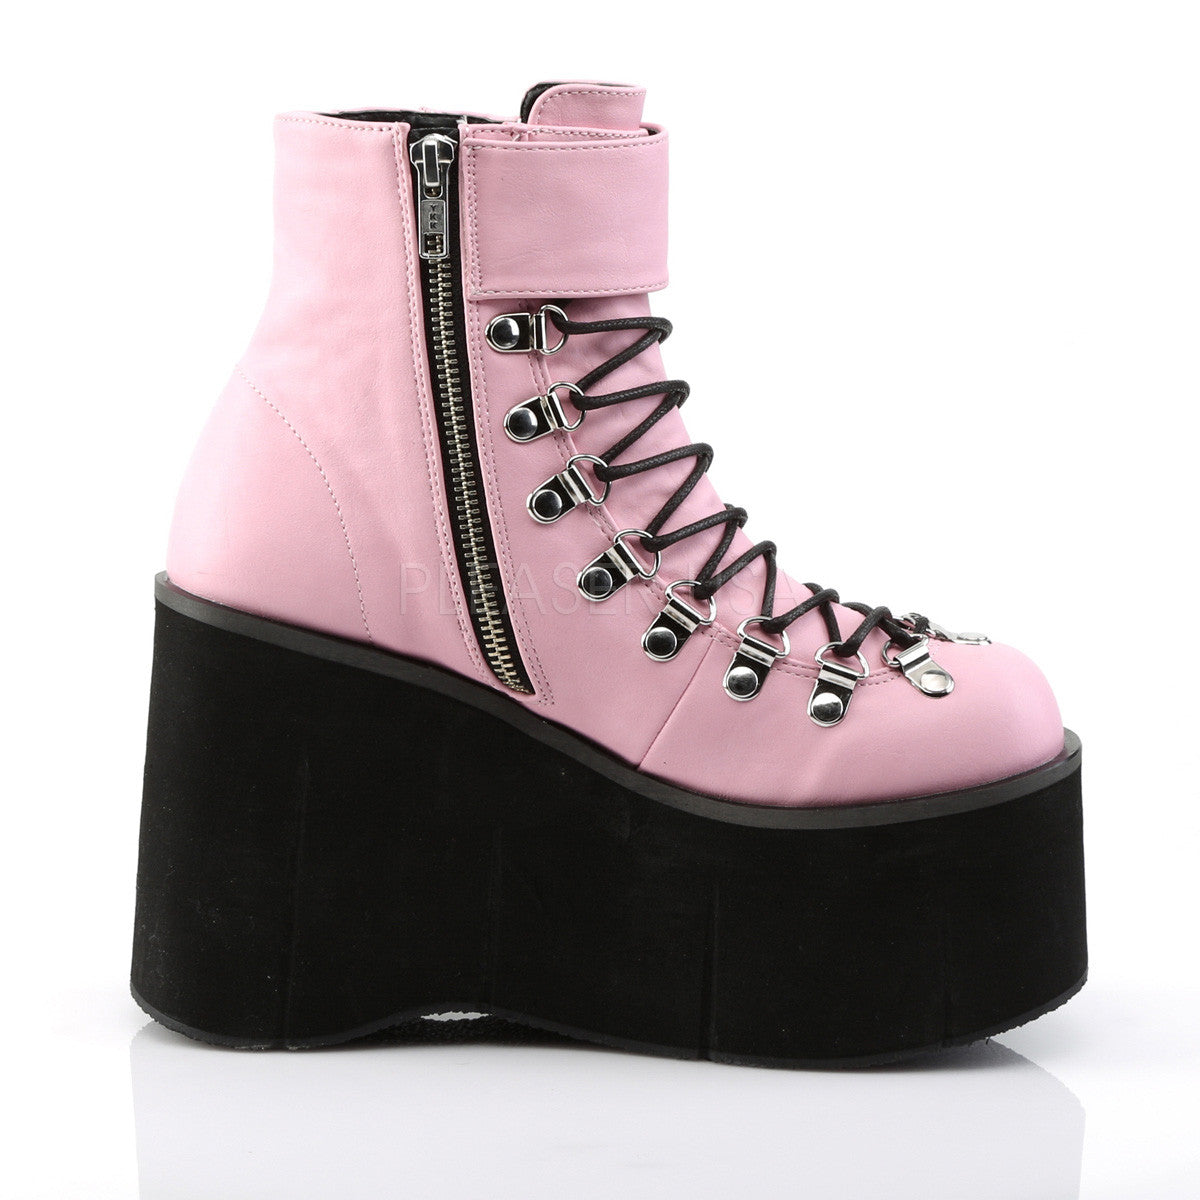 Demonia KERA-21 Baby Pink Ankle Boots - Shoecup.com - 5